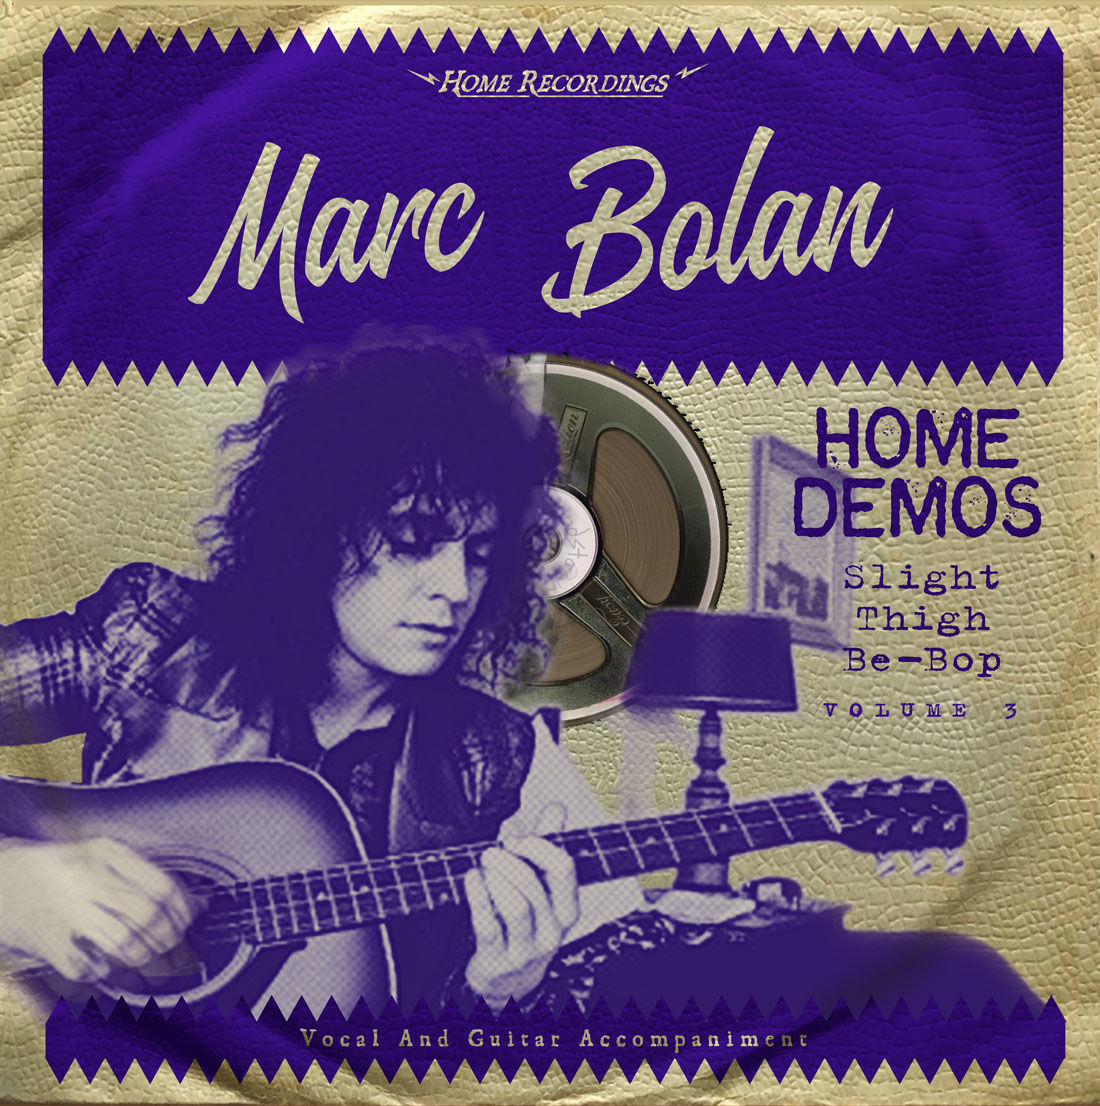 Marc Bolan - Slight Thigh Be-Bop (And Old Gumbo Jill) - Home Demos Volume 3: Limited Vinyl LP